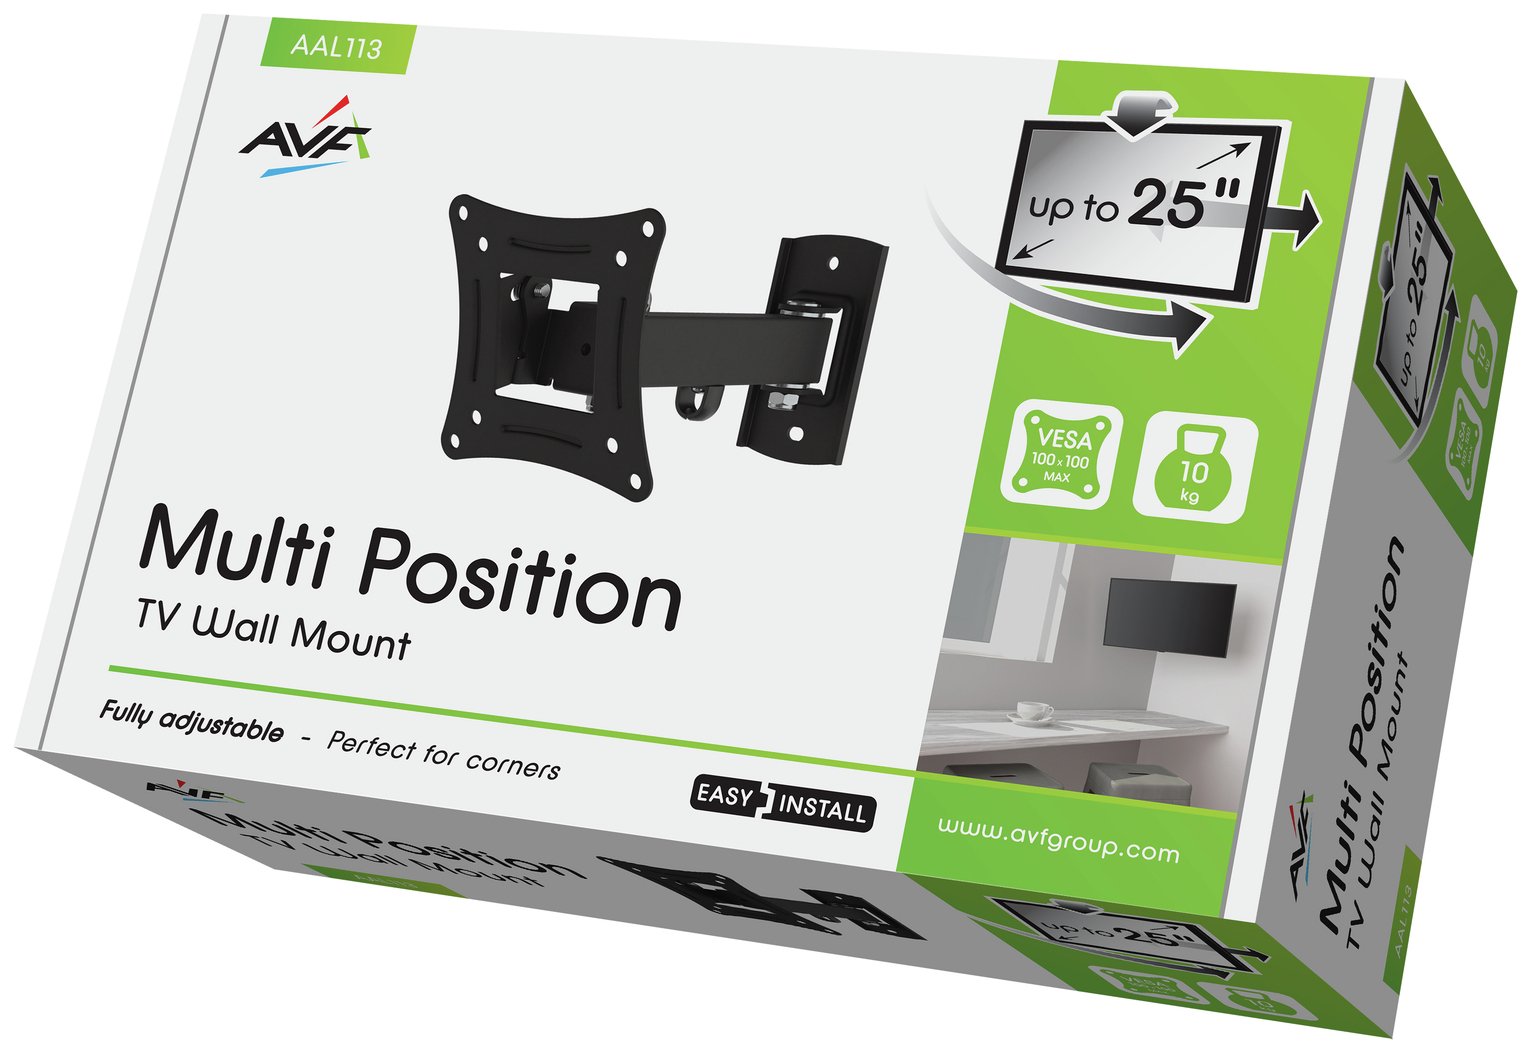 AVF Standard Multi Position Up To 25 Inch TV Wall Bracket Review